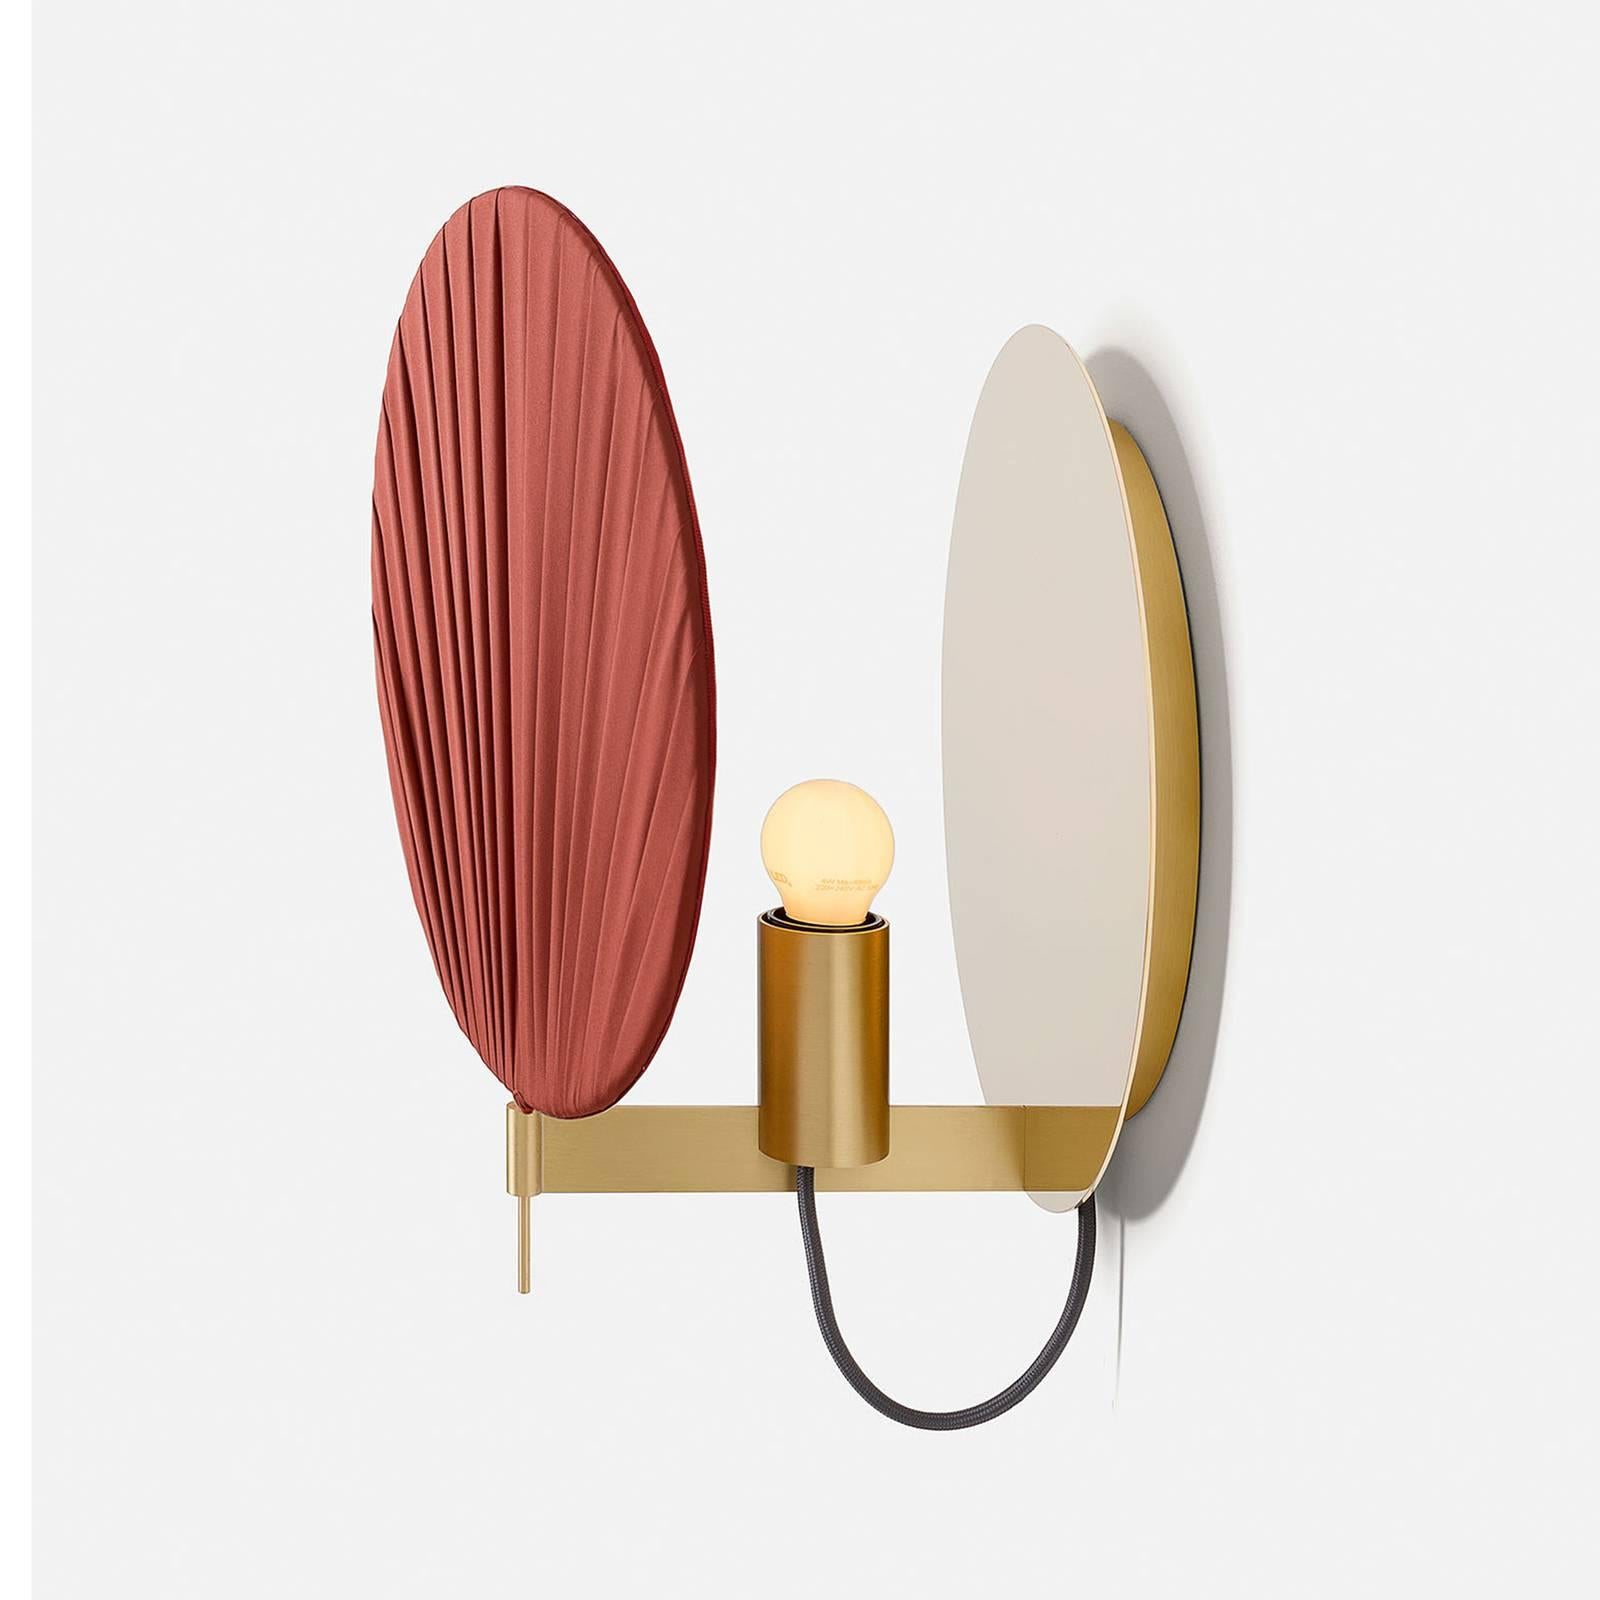 This elegant wall lamp is a celebration of modern design and exquisite craftsmanship. Its deep red shade is made up of multiple layers of pleated organza that create a stunning ambiance, diffusing the light that also reflects on the structure: a